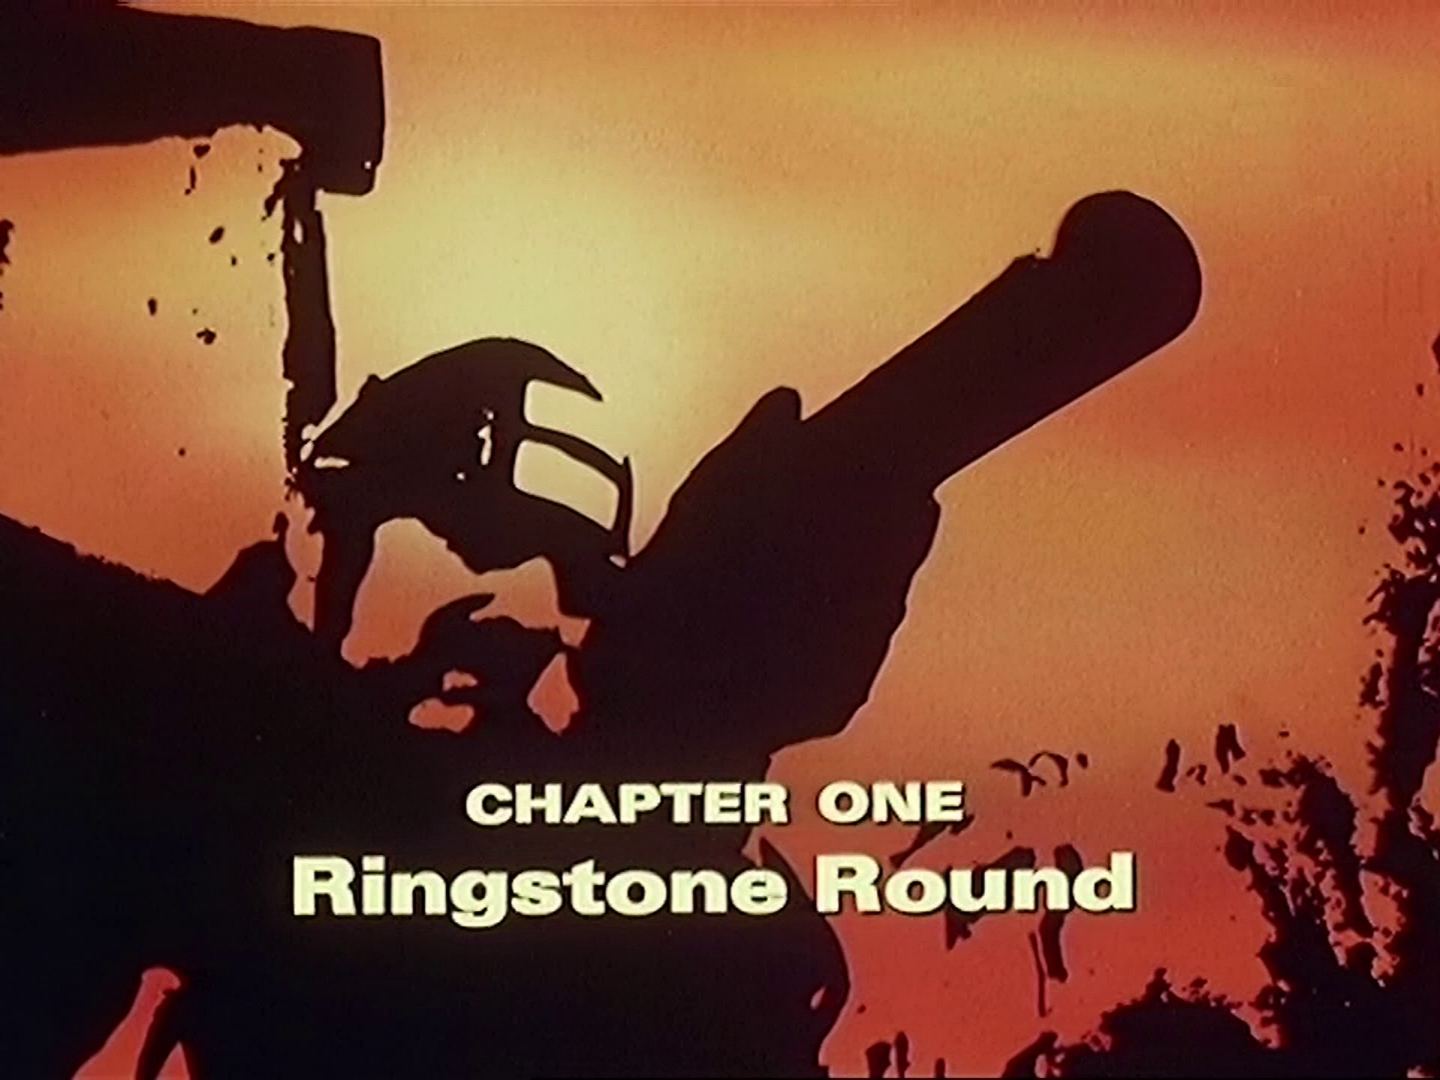 Main title from the ‘Ringstone Round’ episode of Quatermass (1979) (1). Chapter one